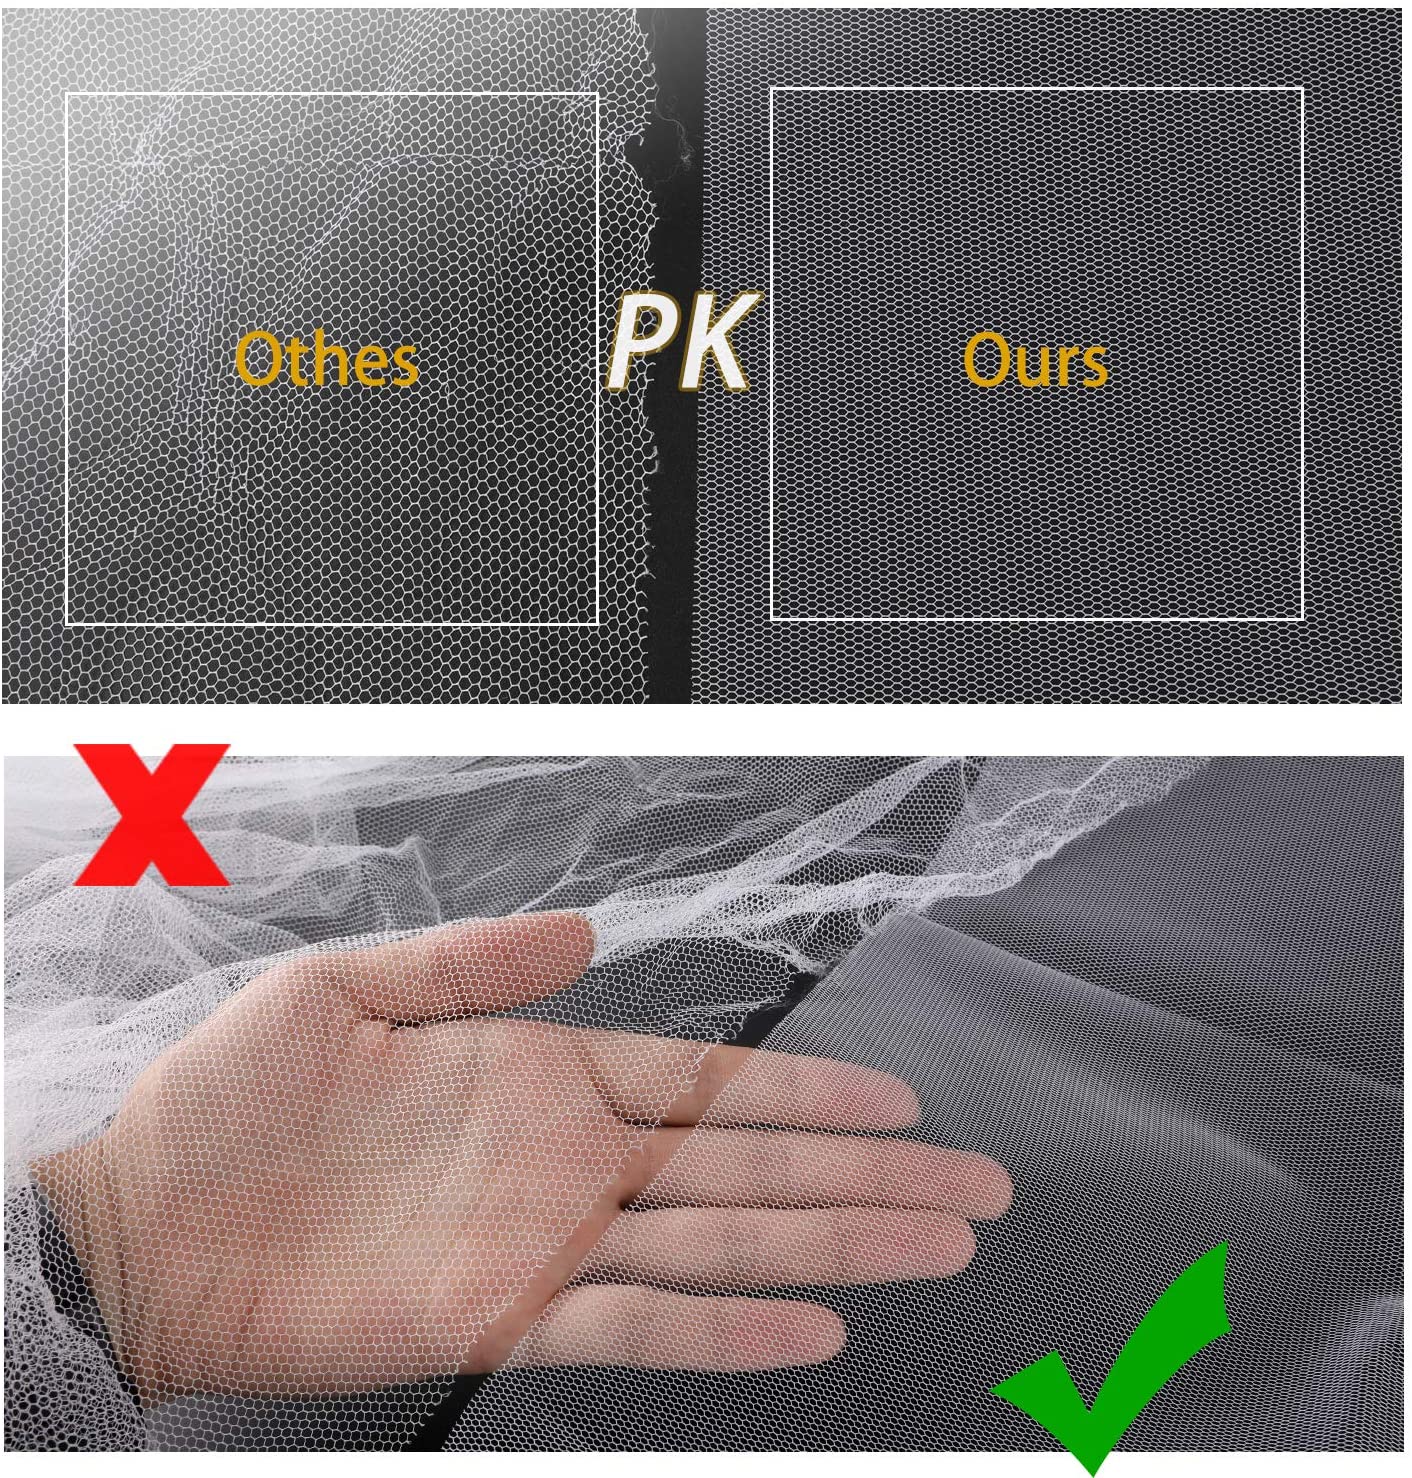 Phogary Mosquito Net for Windows, Upgrade Fly Window Screen Mesh Insect 